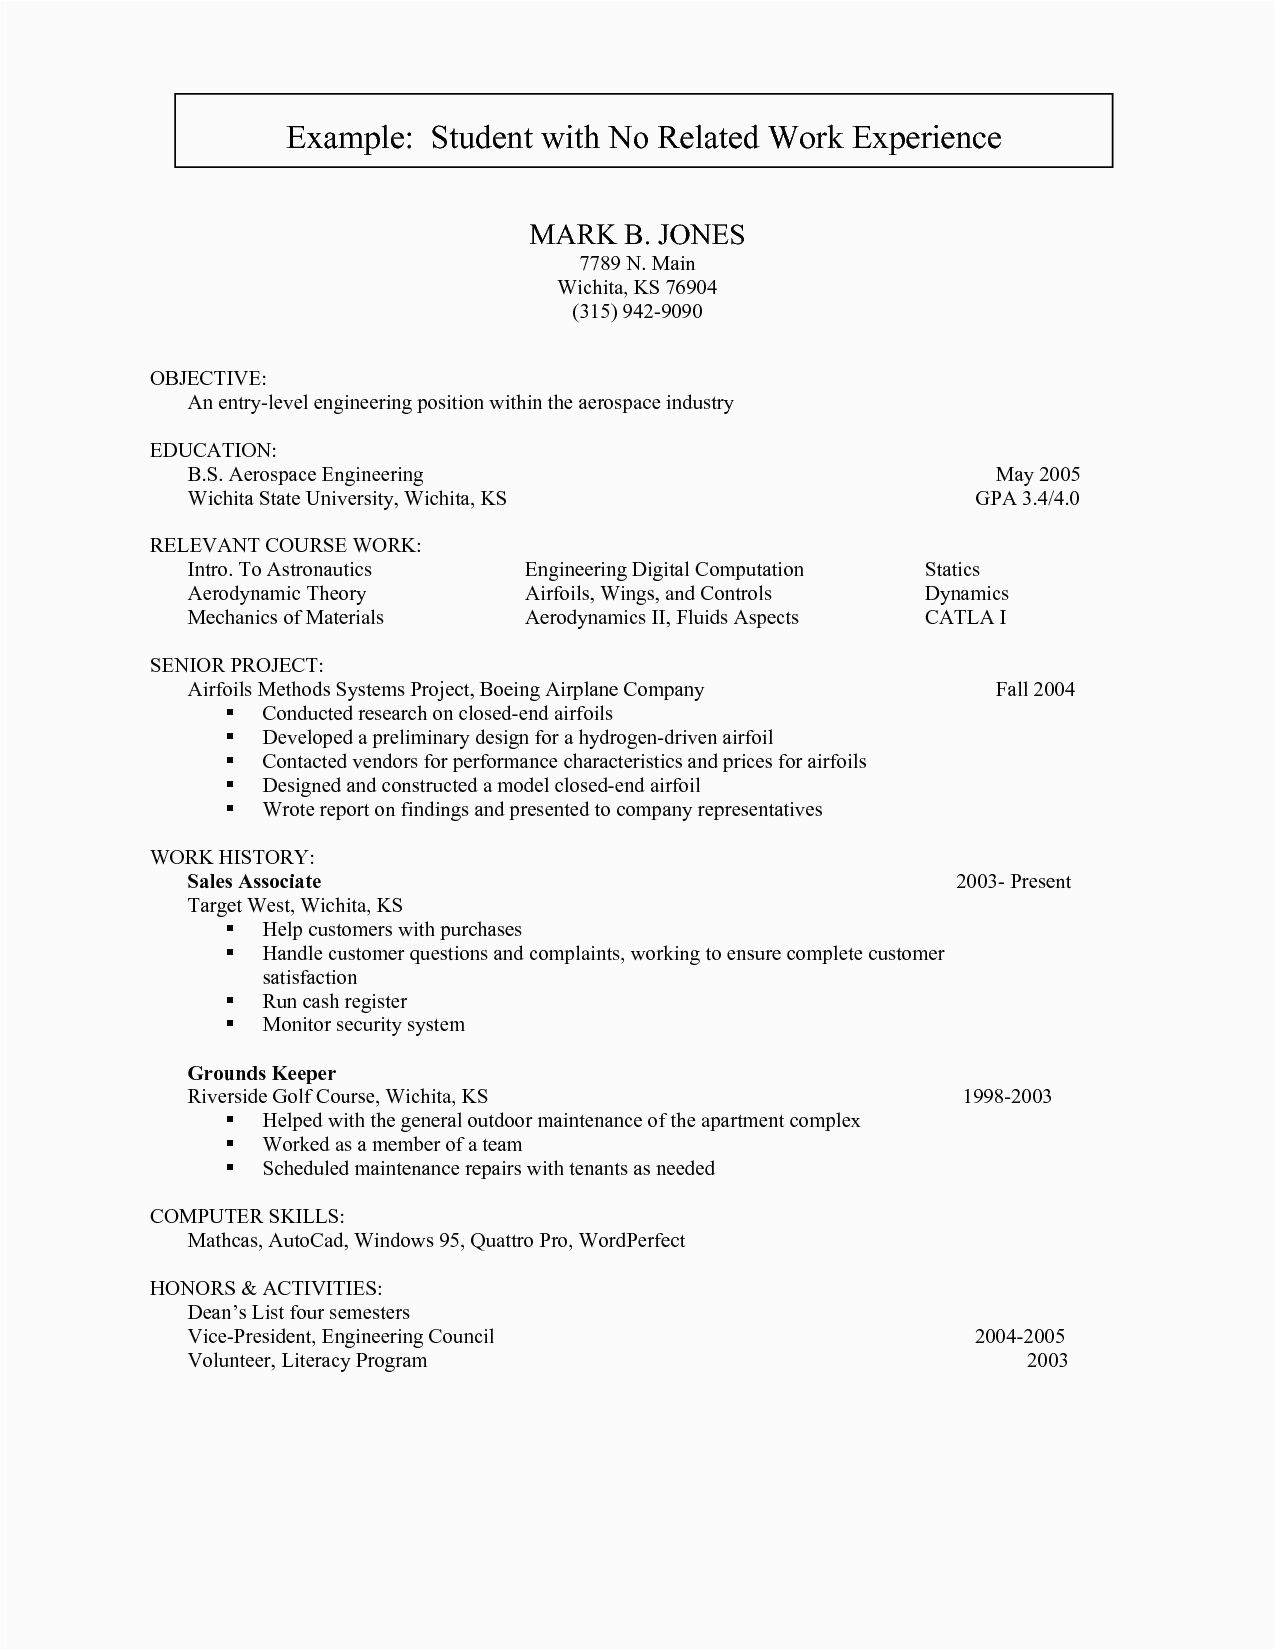 Functional Resume Samples with No Job Experience Resume with No Work Experience Samples